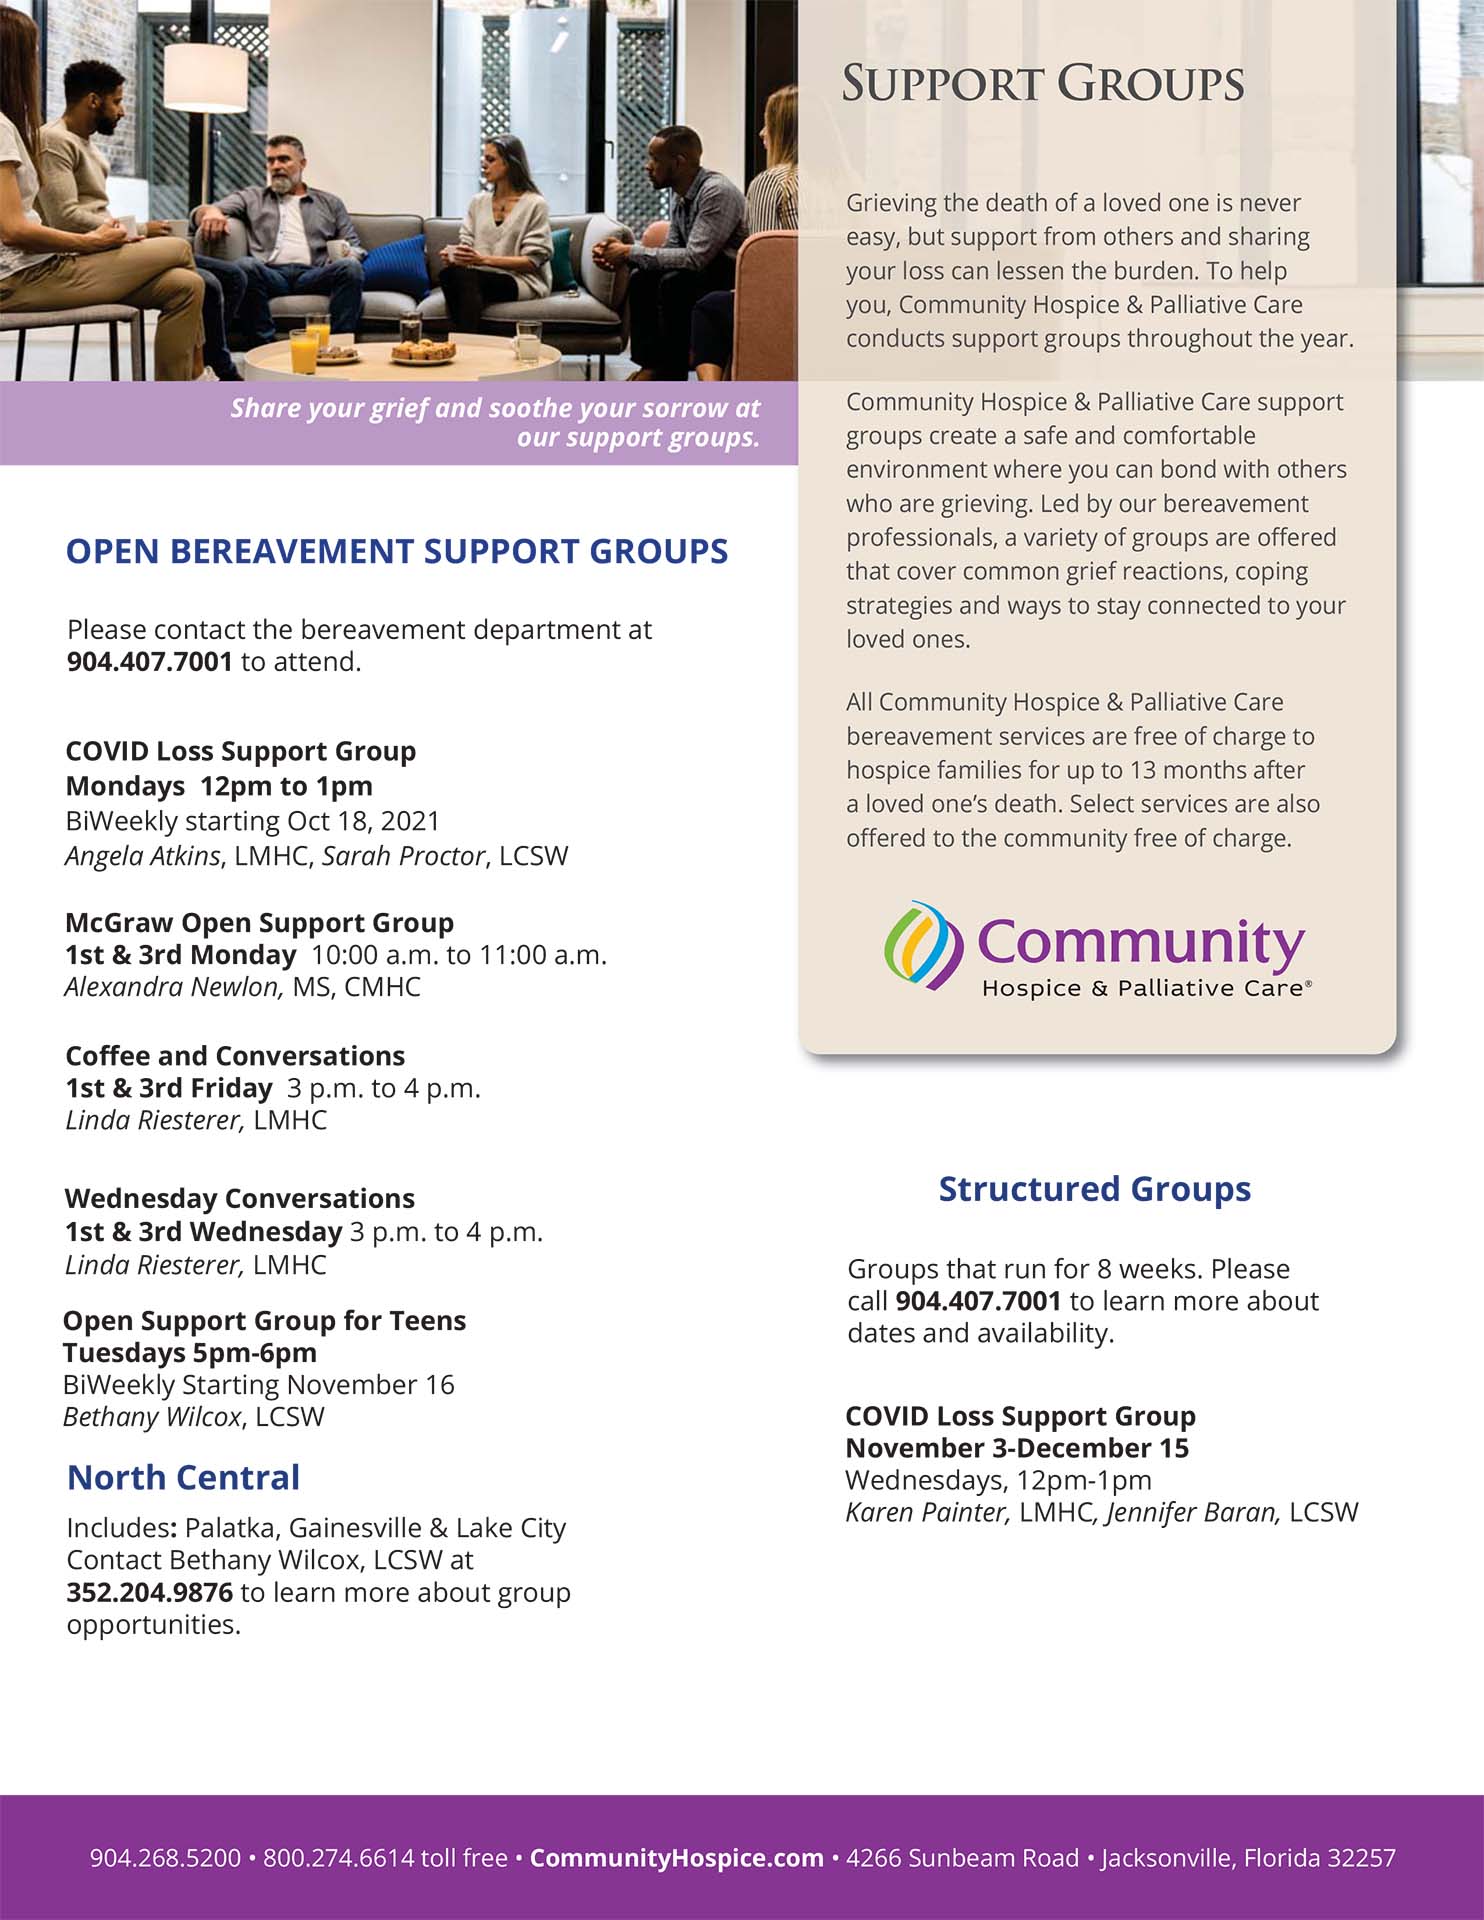 Grief and Bereavement Support Groups and Structured Support Groups